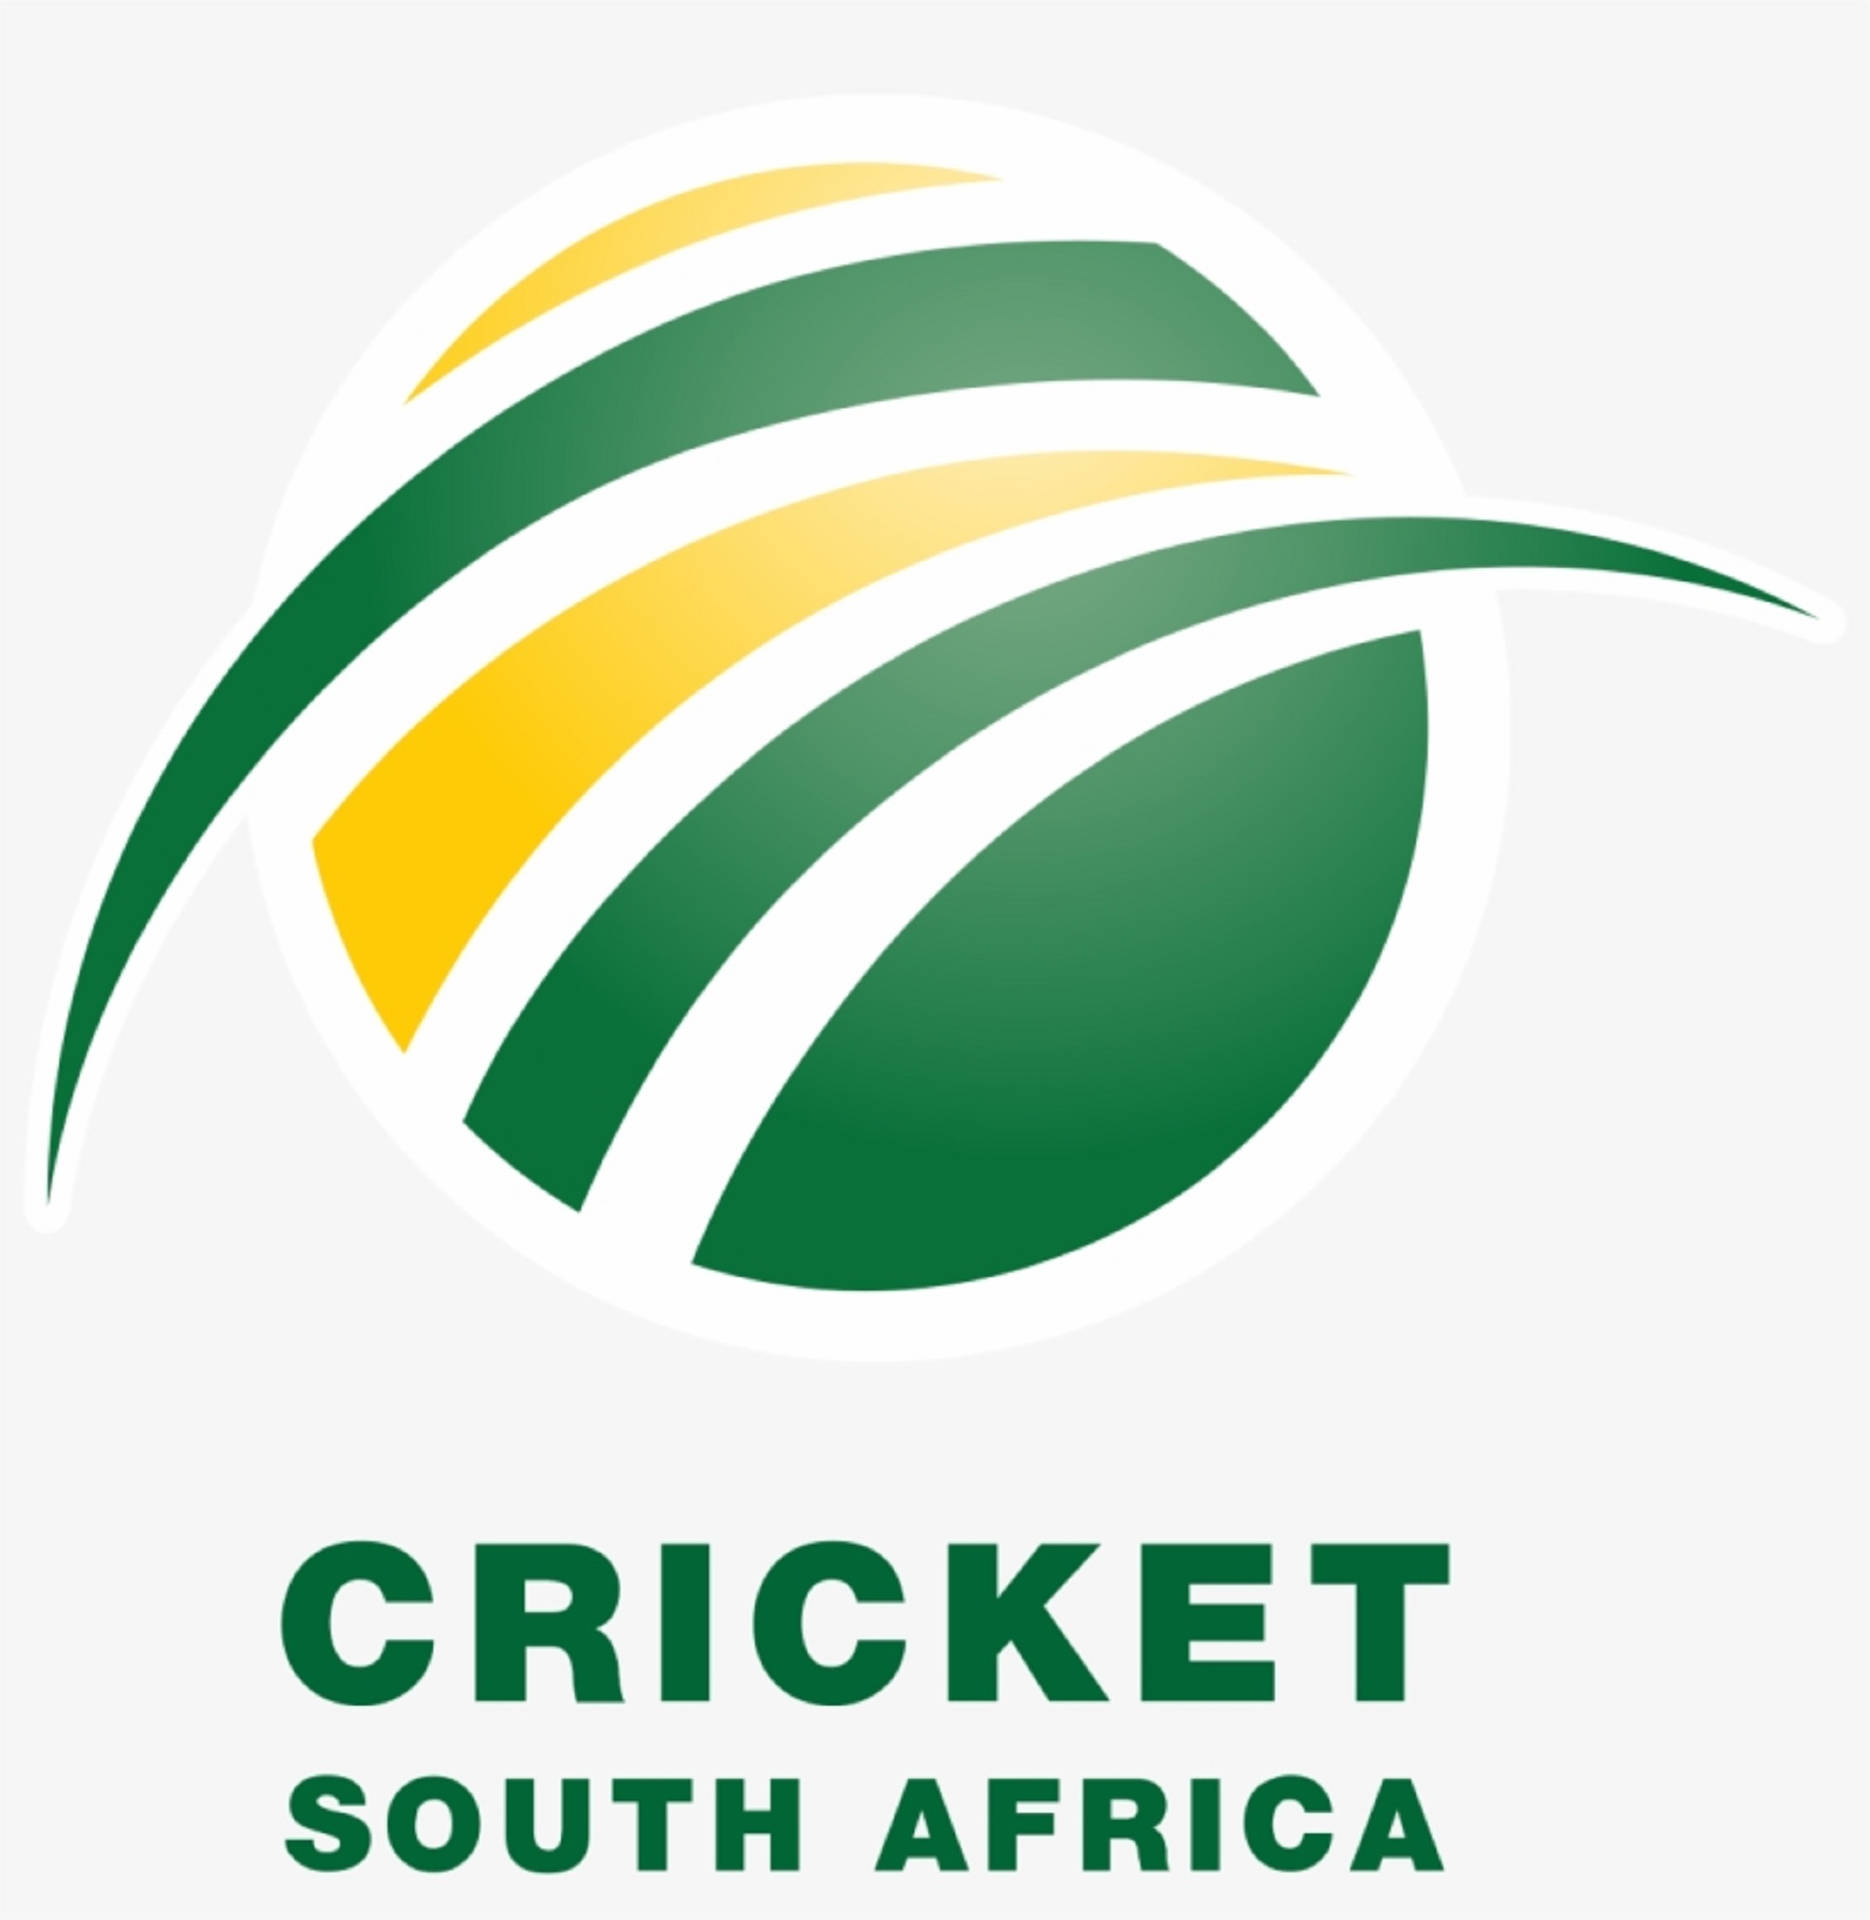 South Africa Cricket Logo In White